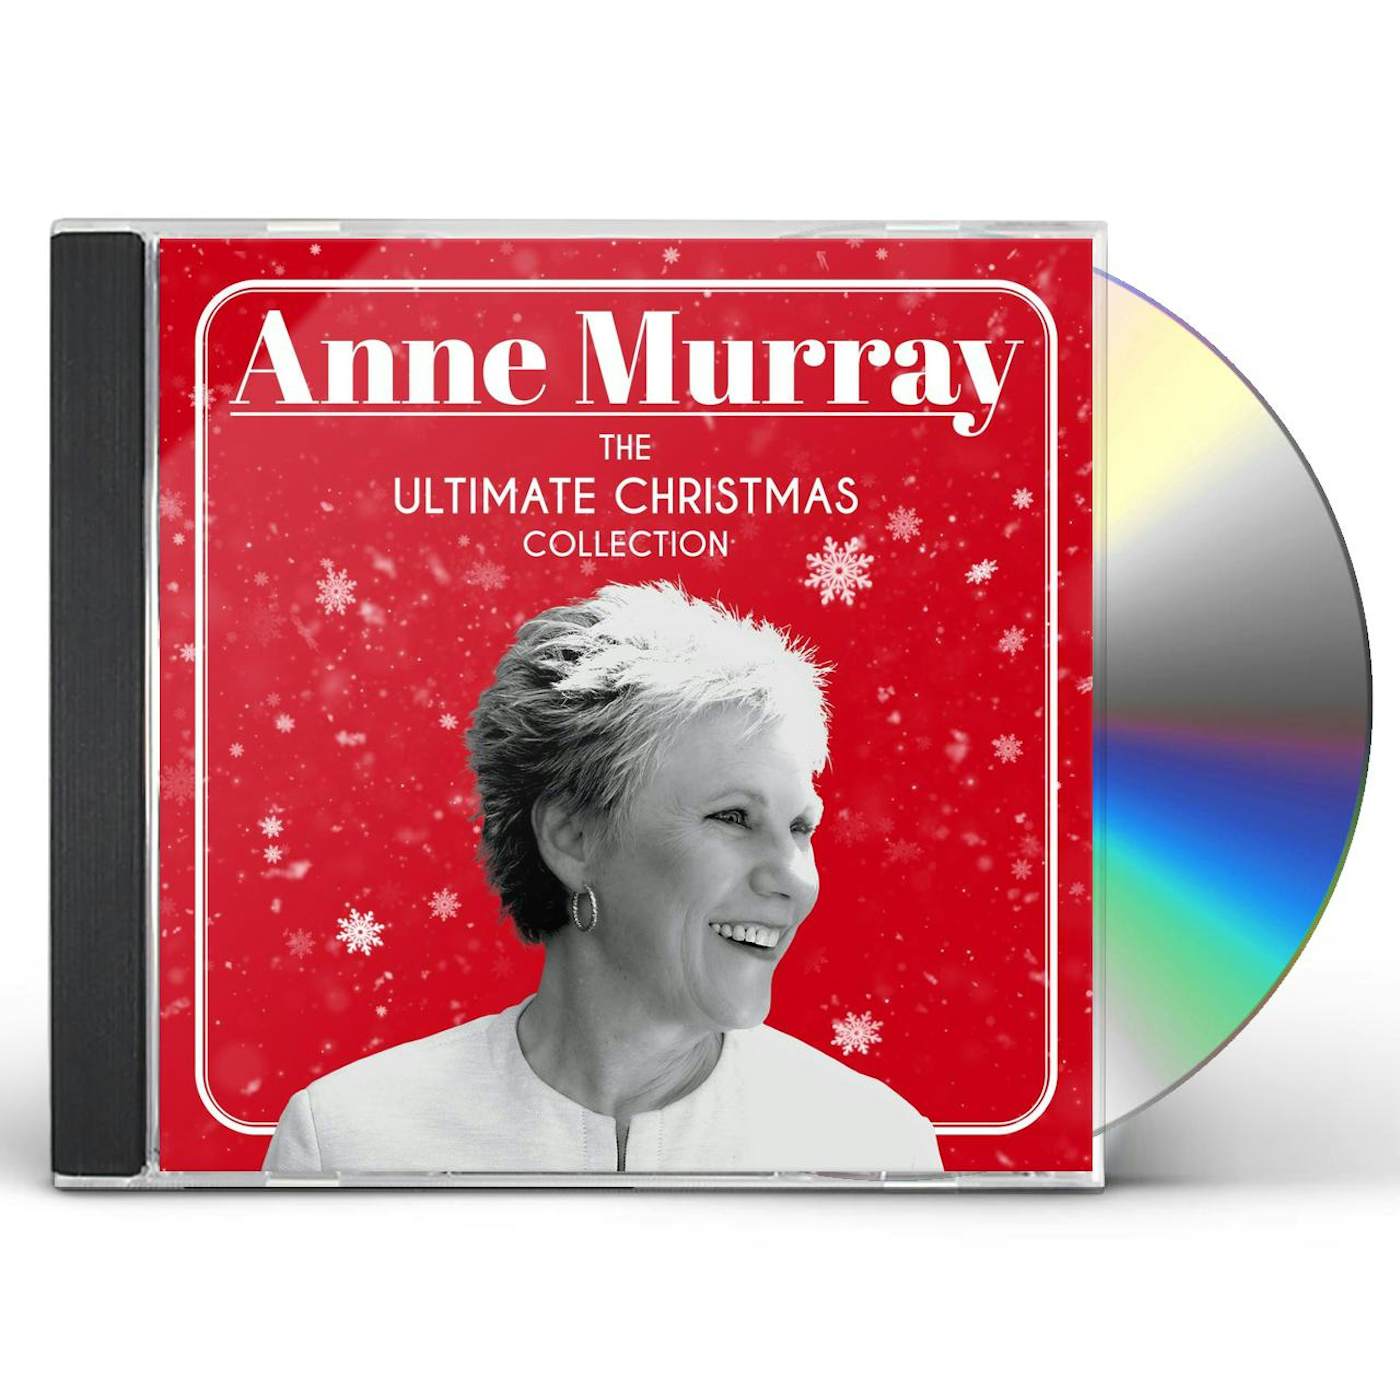 Anne Murray ULTIMATE CHRISTMAS COLLECTION CD